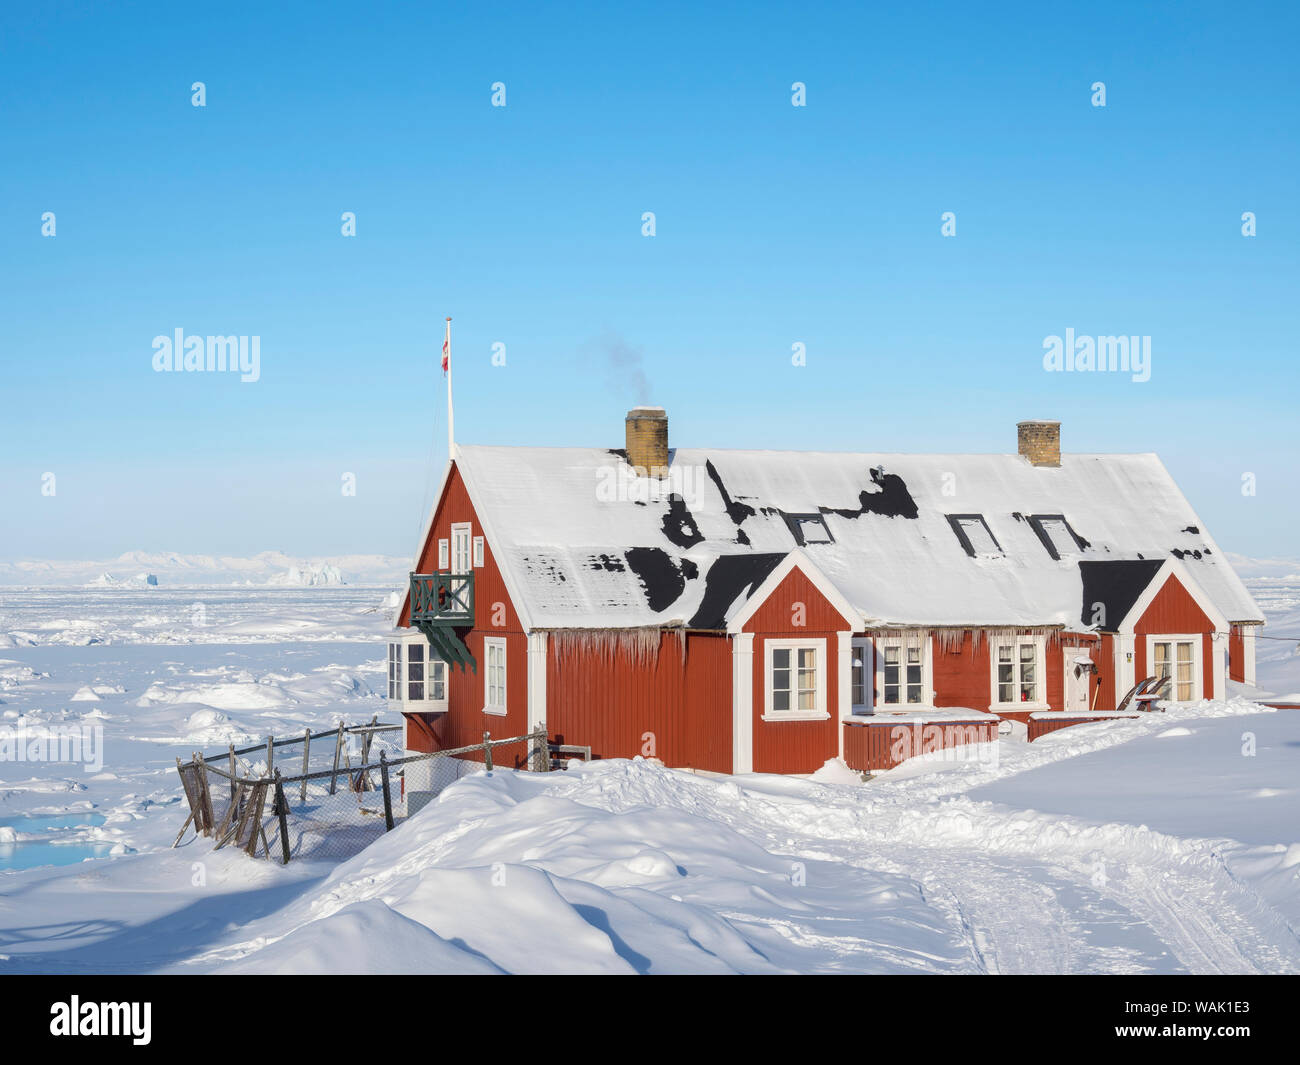 Sea ice in the frozen Disko Bay with icebergs. Greenland. (Editorial Use Only) Stock Photo